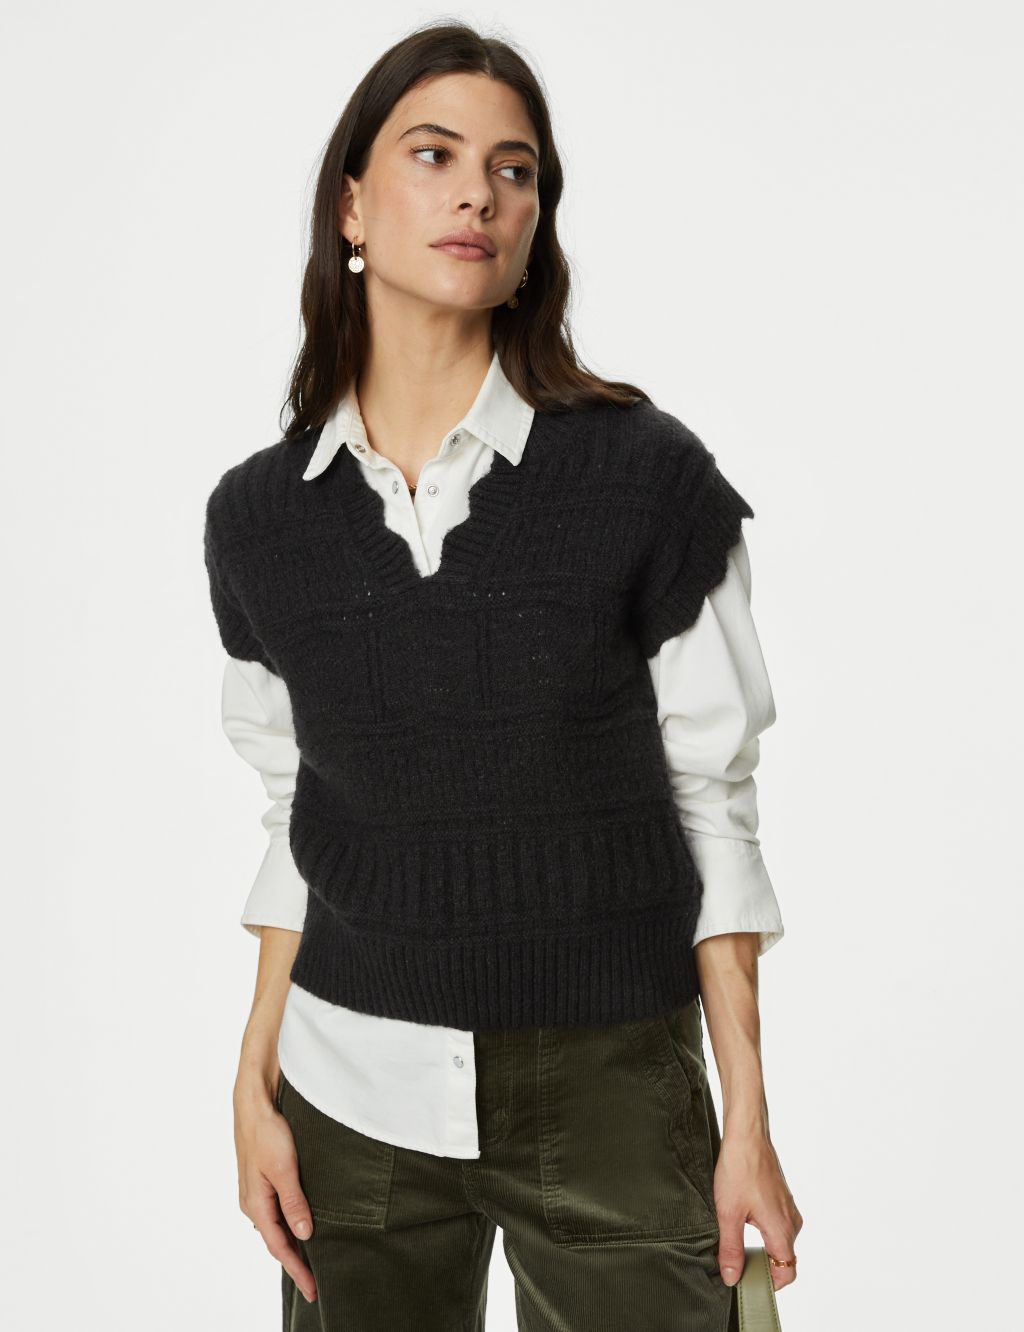 Notch Neck Knitted Vest with Wool image 4